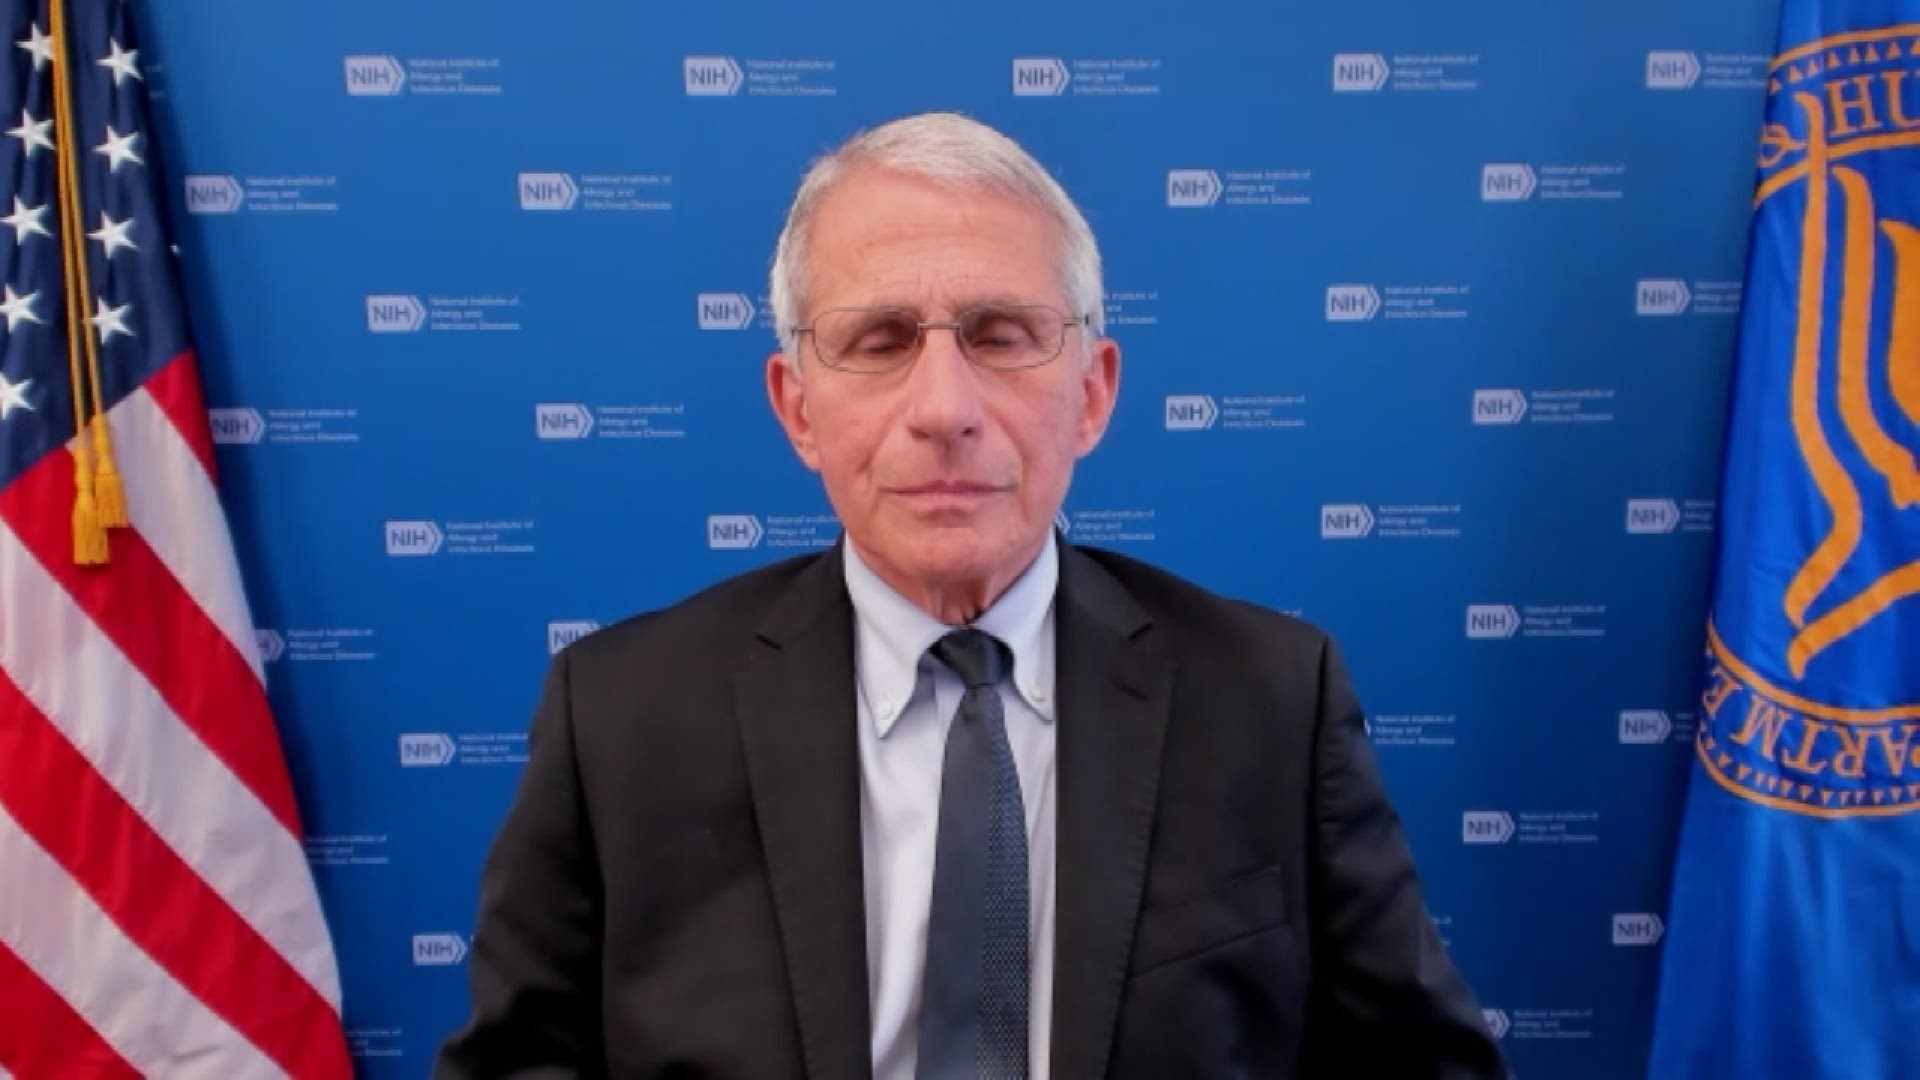 Verify reporter Evan Koslof talks 1-on-1 with NIH Director Dr. Anthony Fauci about vaccines, mask mandates and more.